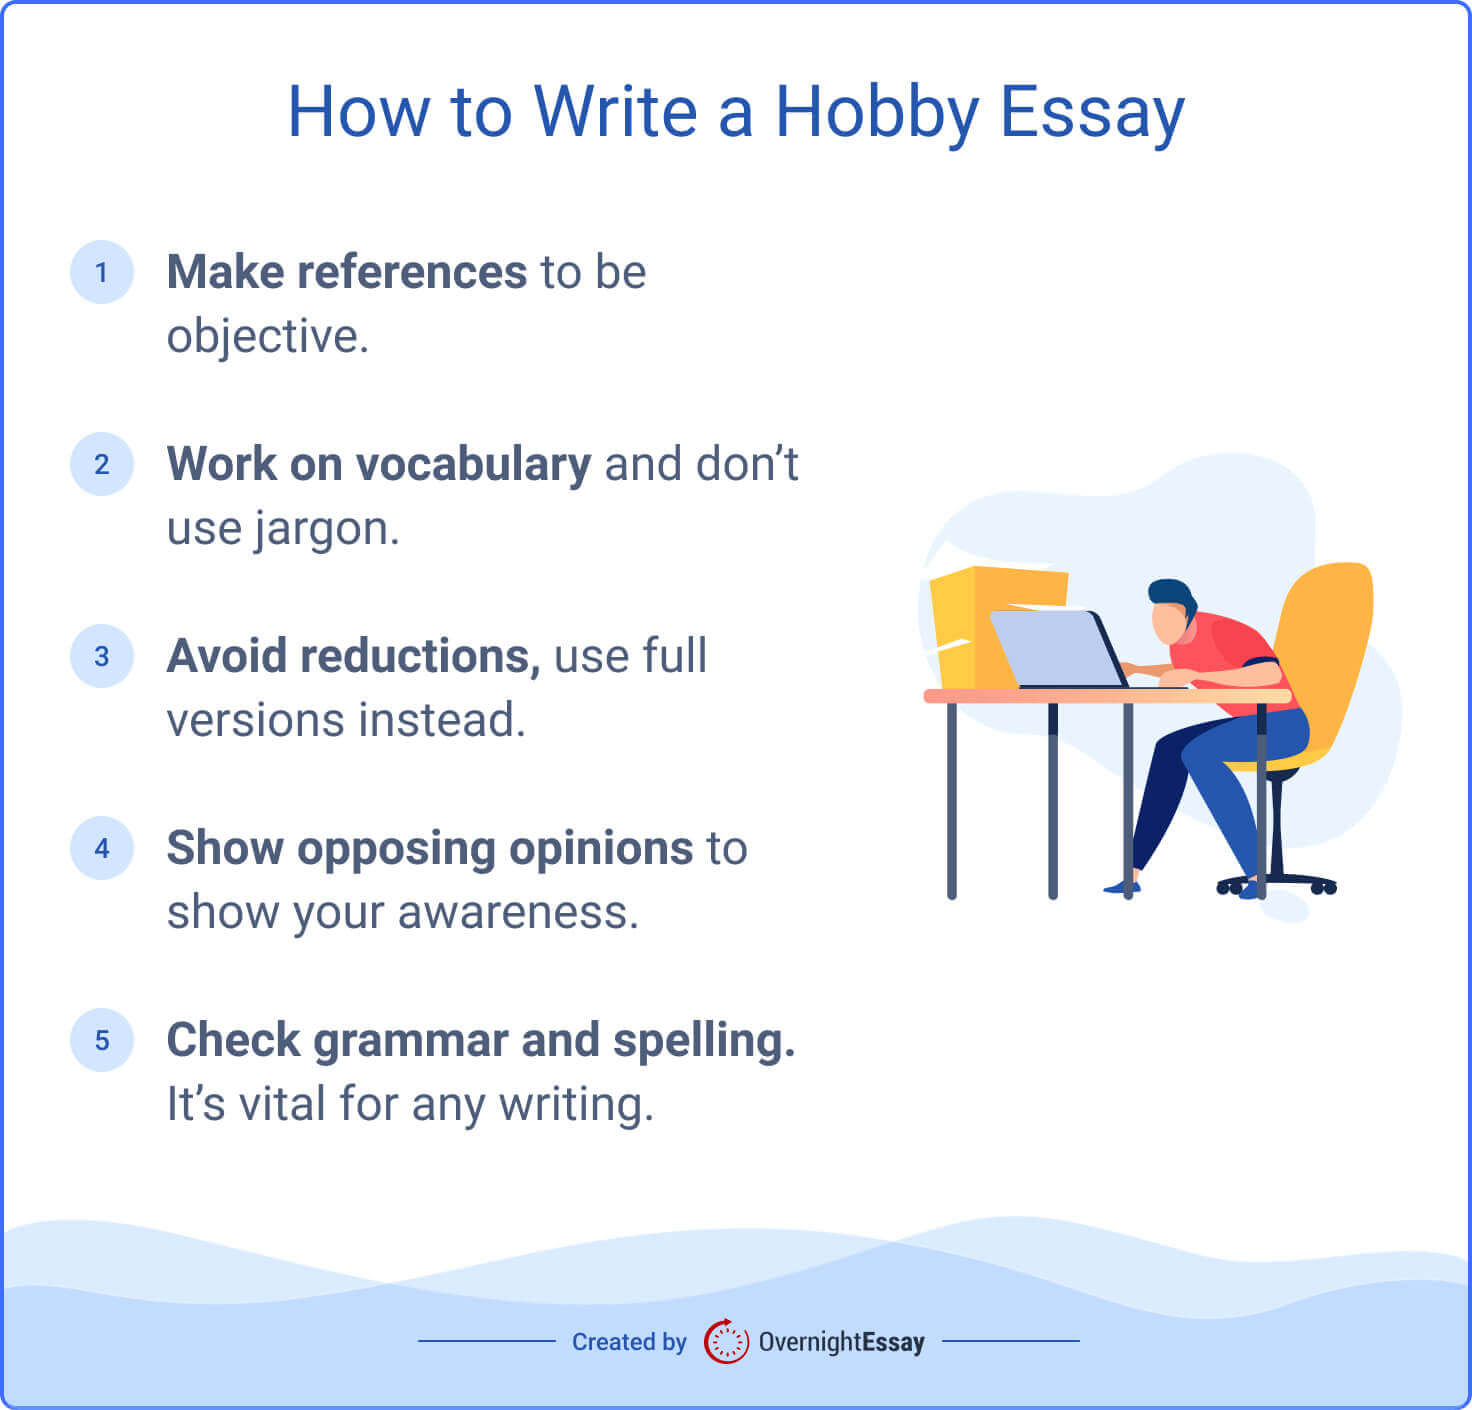 how to make a career out of your hobby essay